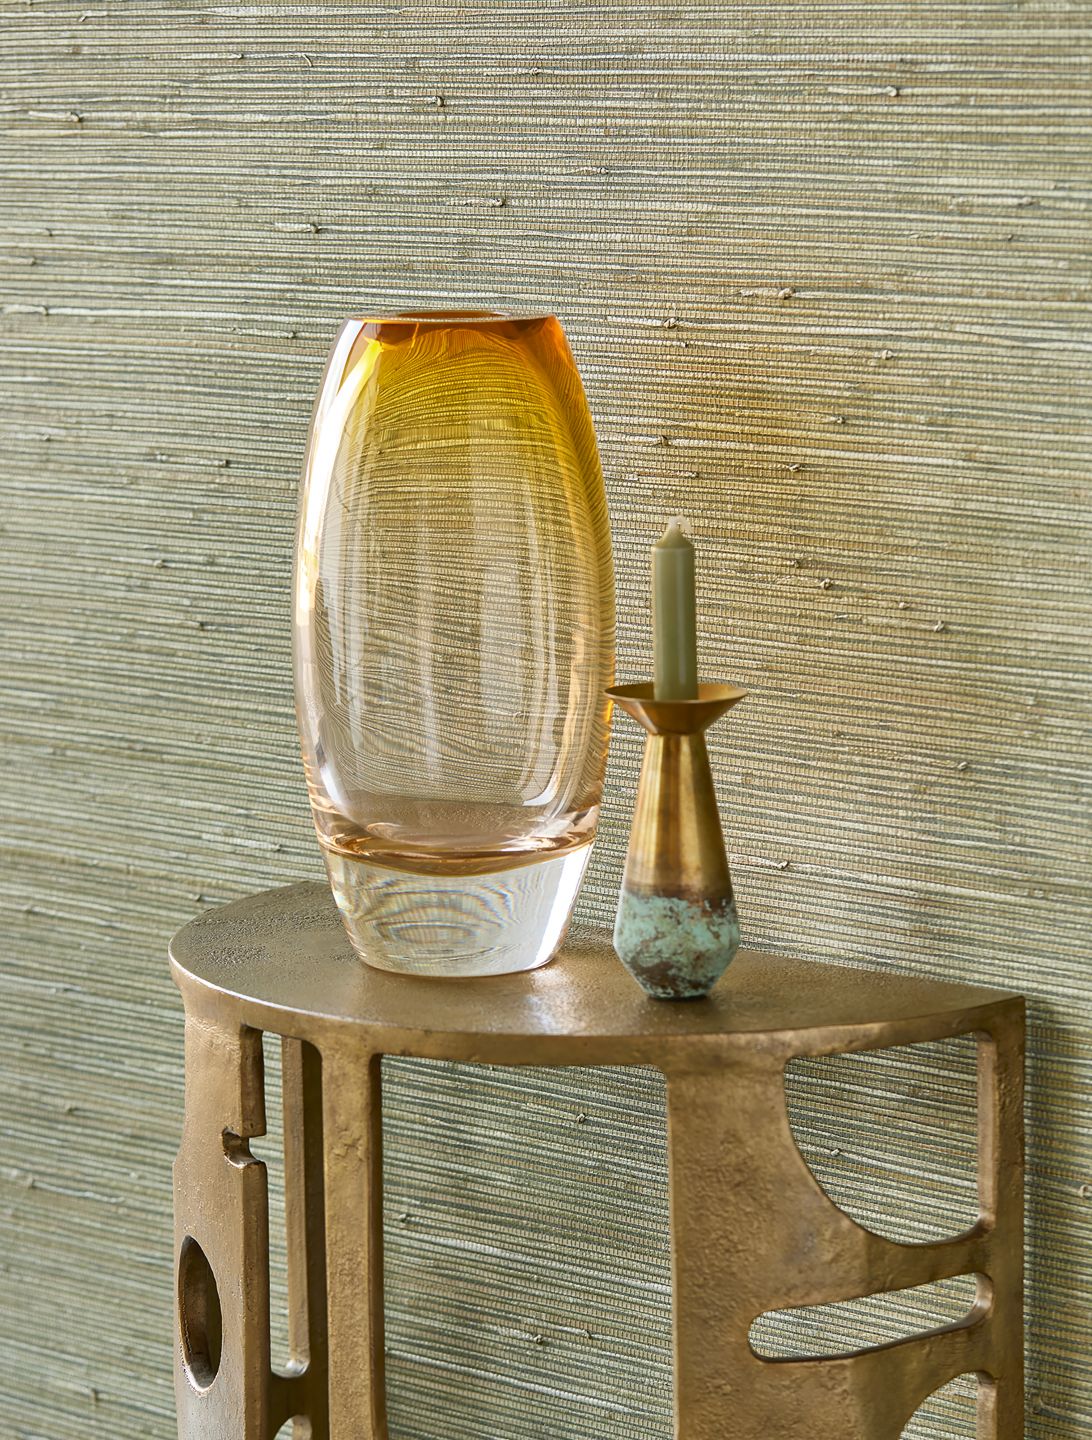 A reed-green grass wallpaper on the wall behind a small table with a vase